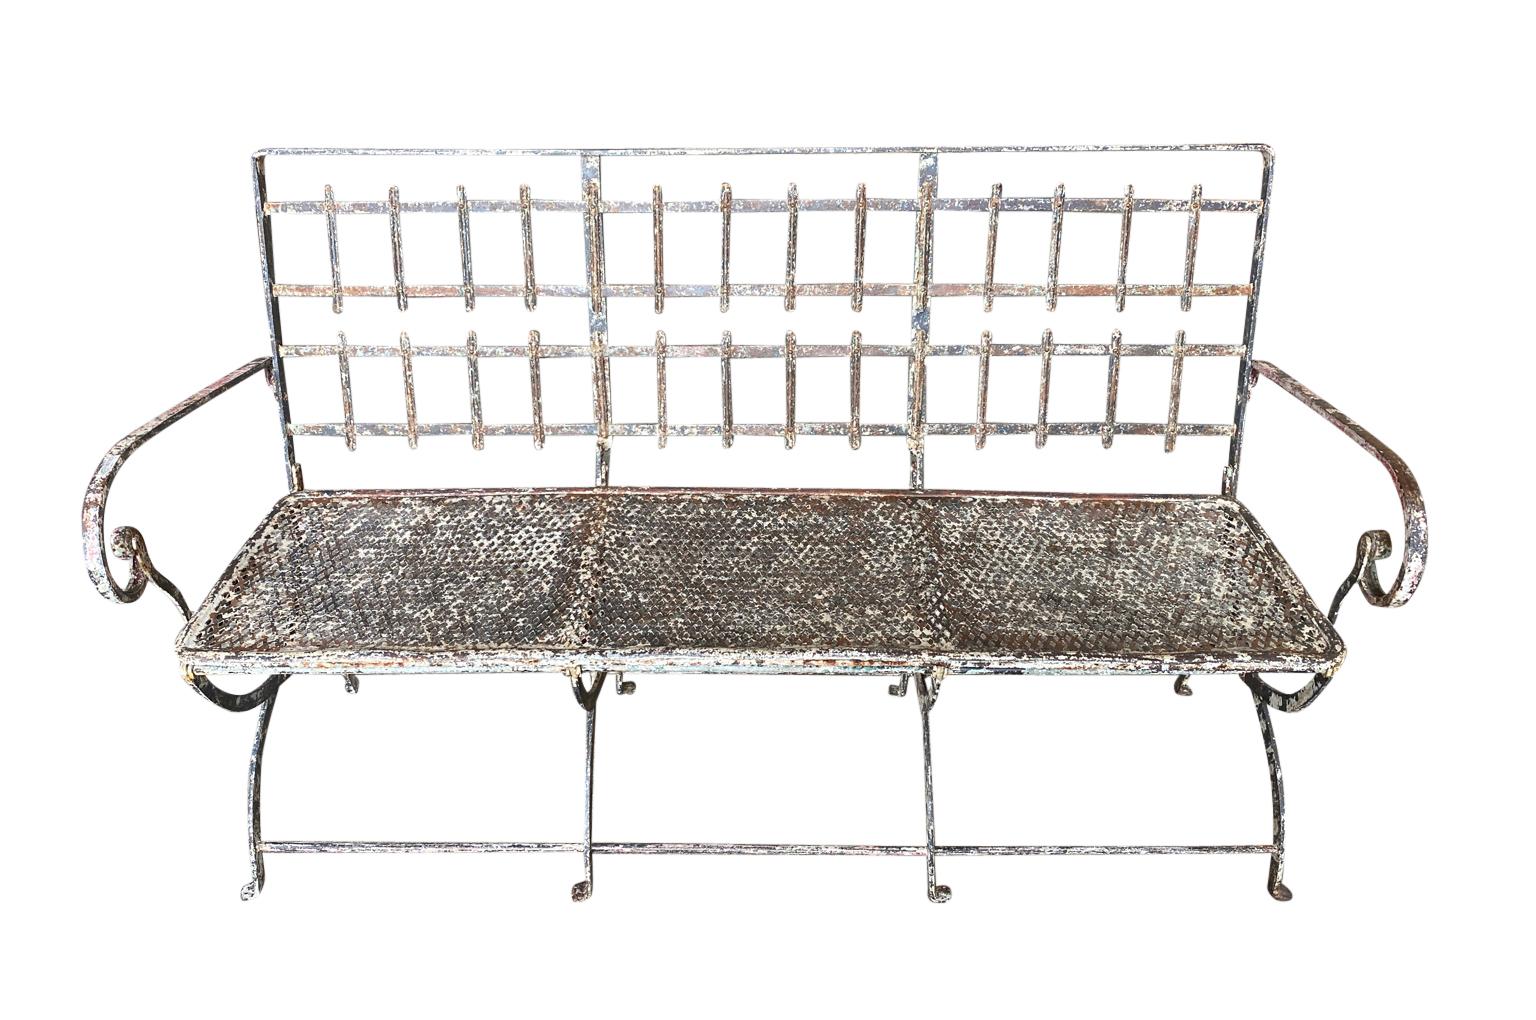 A very charming 19th century Garden Bench from the Provence region of France. Soundly constructed from painted iron. The bench is collapsible. The seat height is 16 1/4